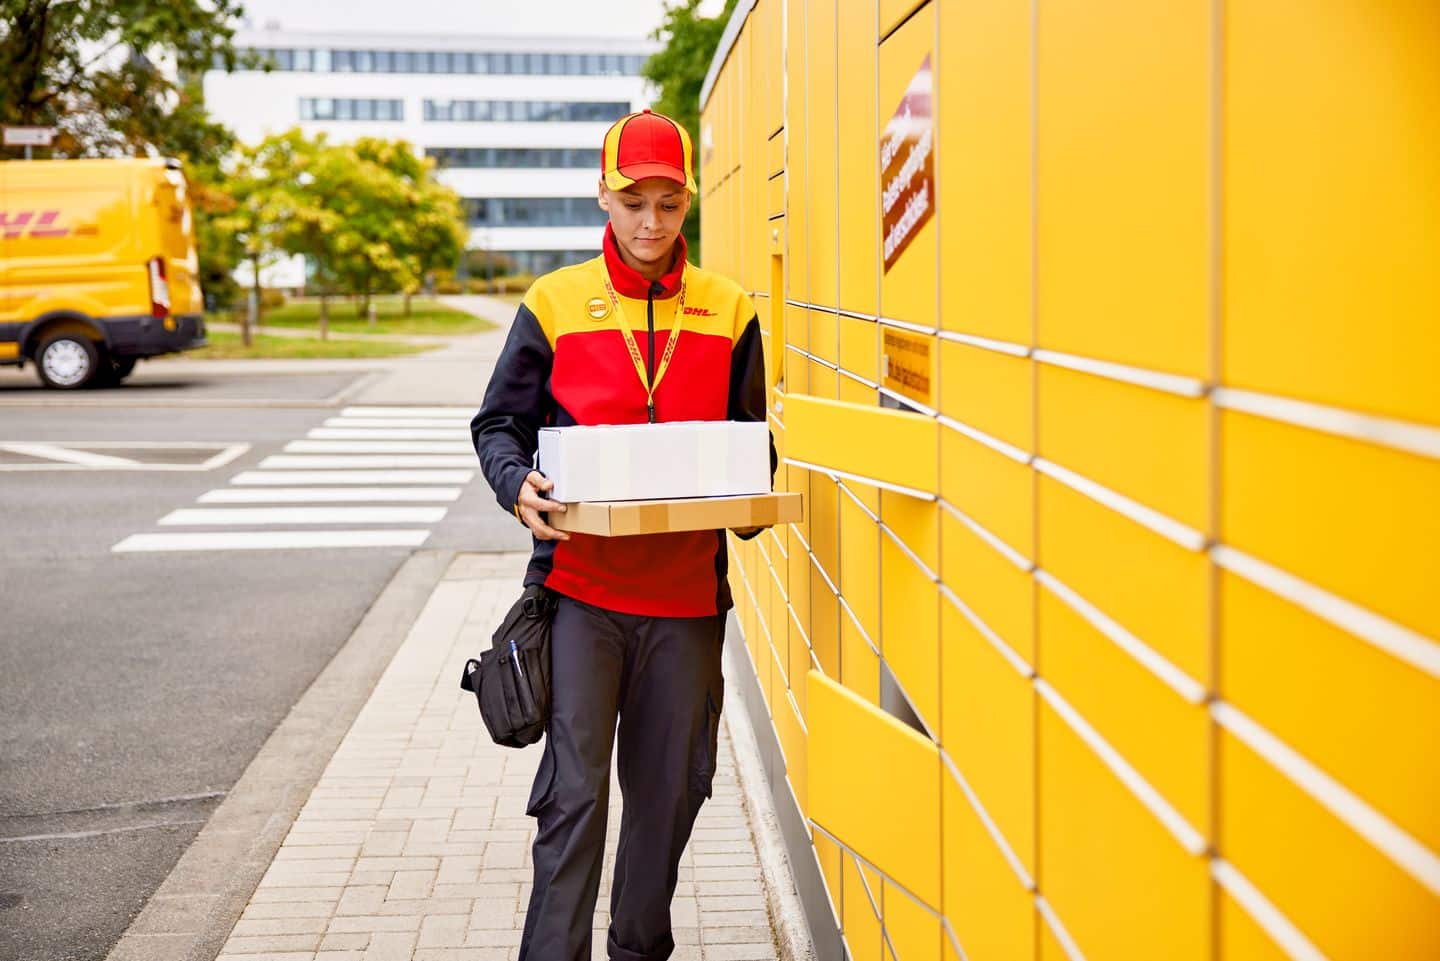 Tercero Gaviota Peregrinación Everything you need to know about our express delivery services